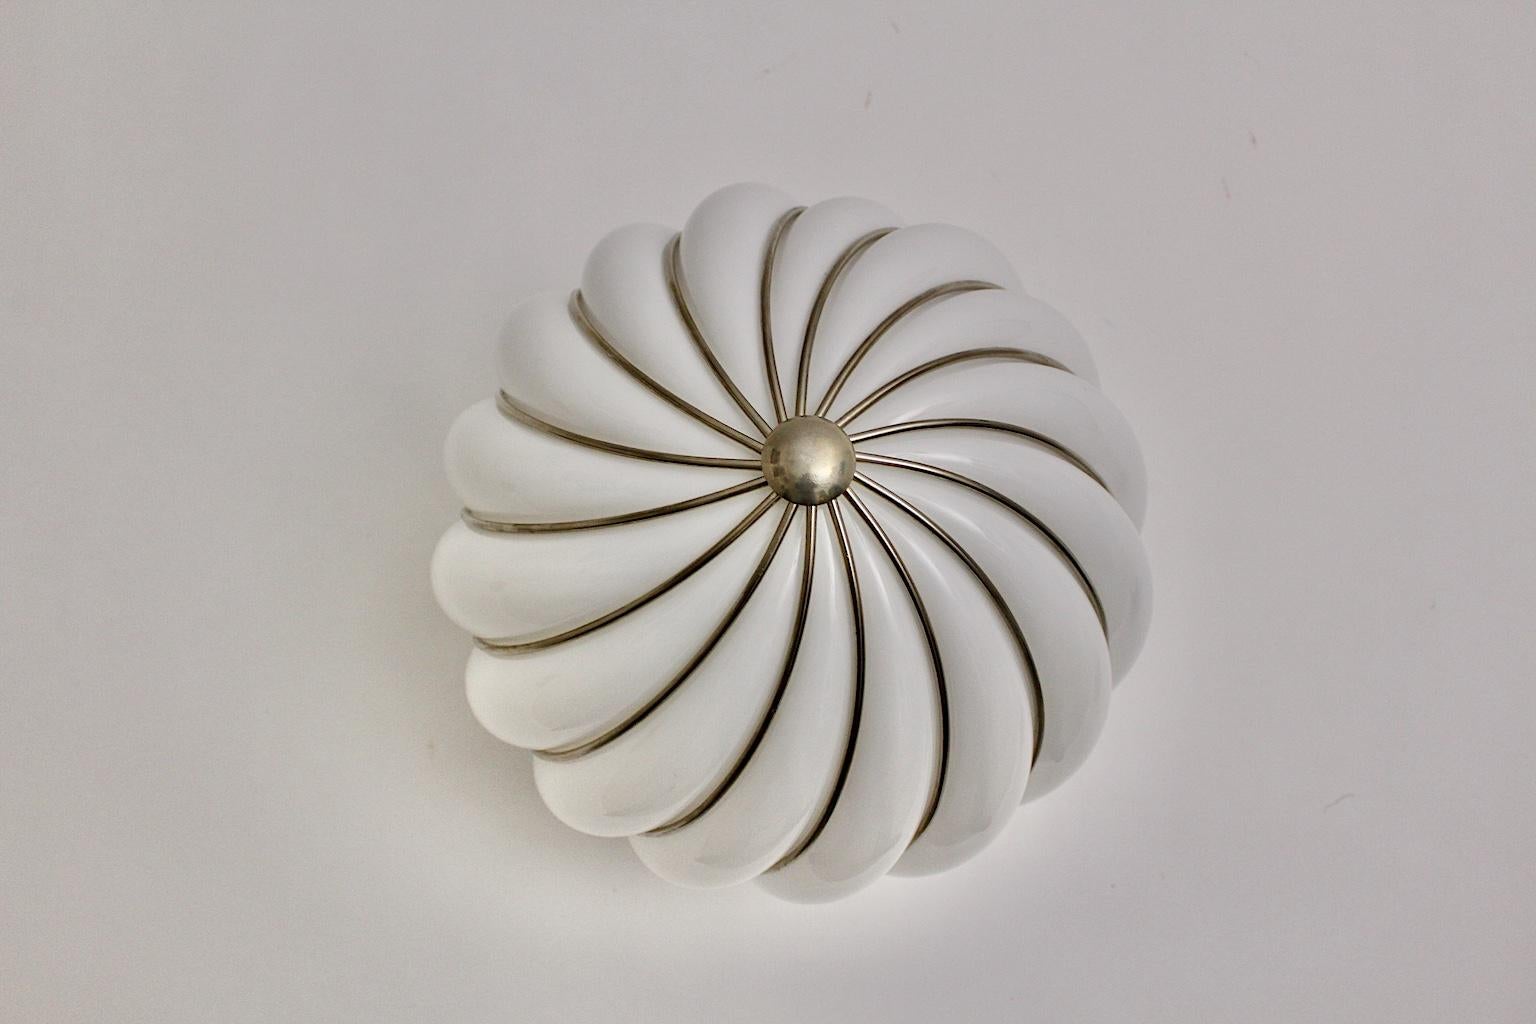 Italian Mid-Century Modern Vintage White Glass Pendant Adolf Loos Veart Italy 1960s For Sale